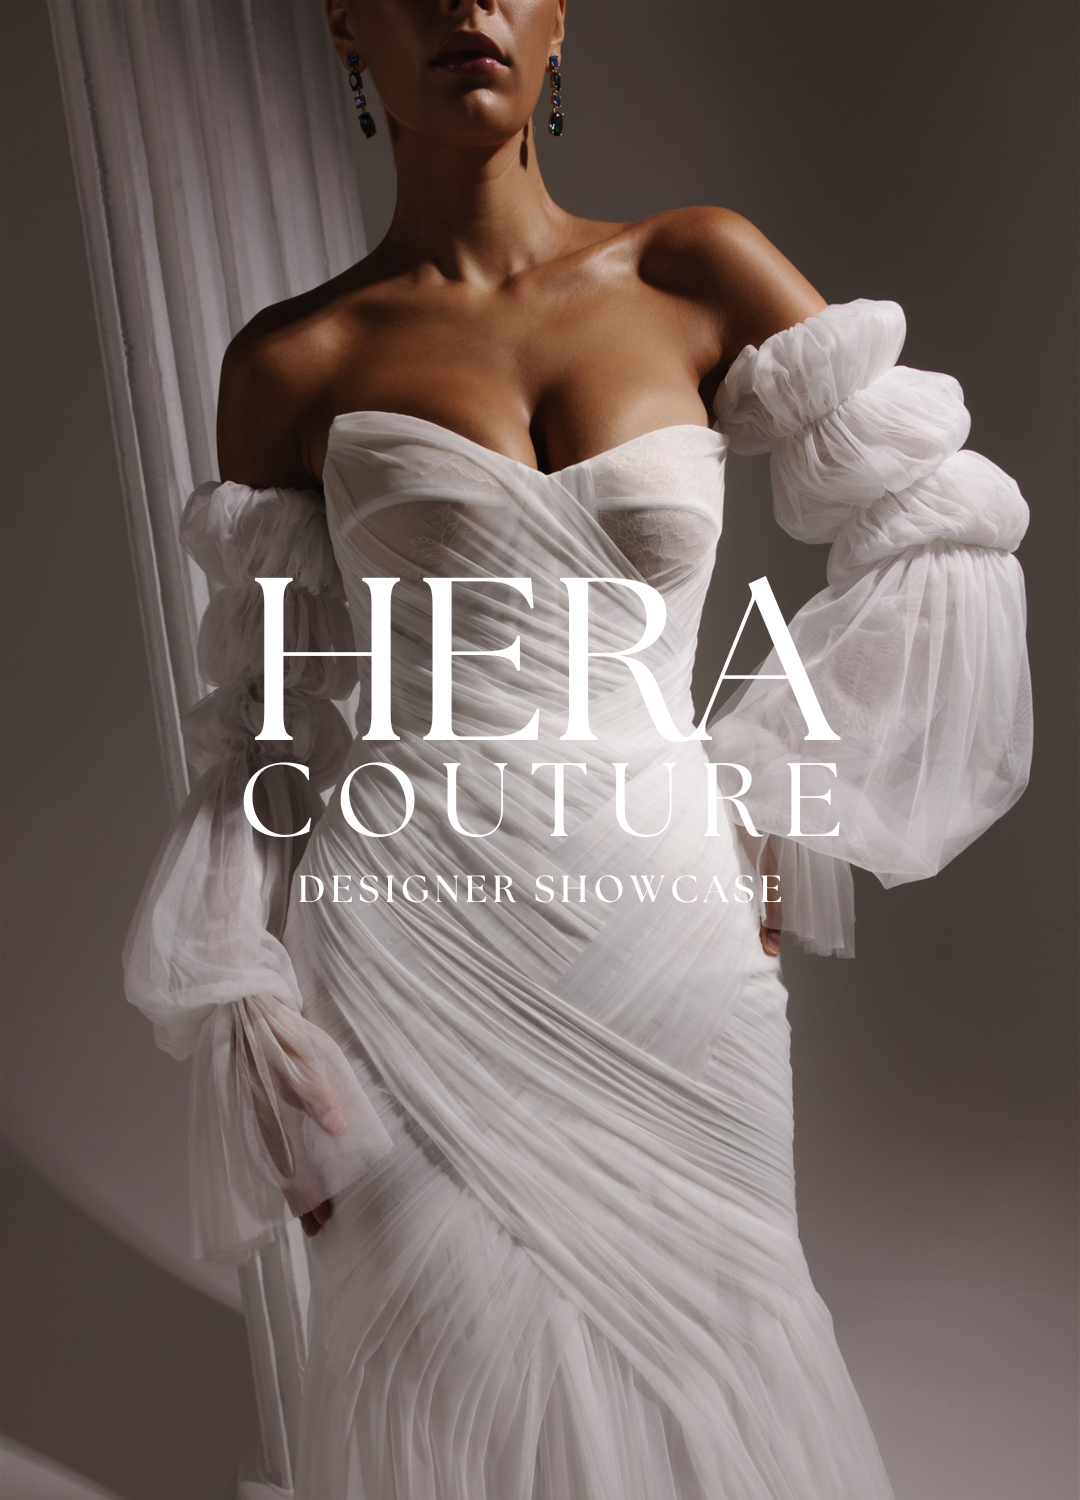 New Collections - Meet Hera Couture Designer Katie Yeung!